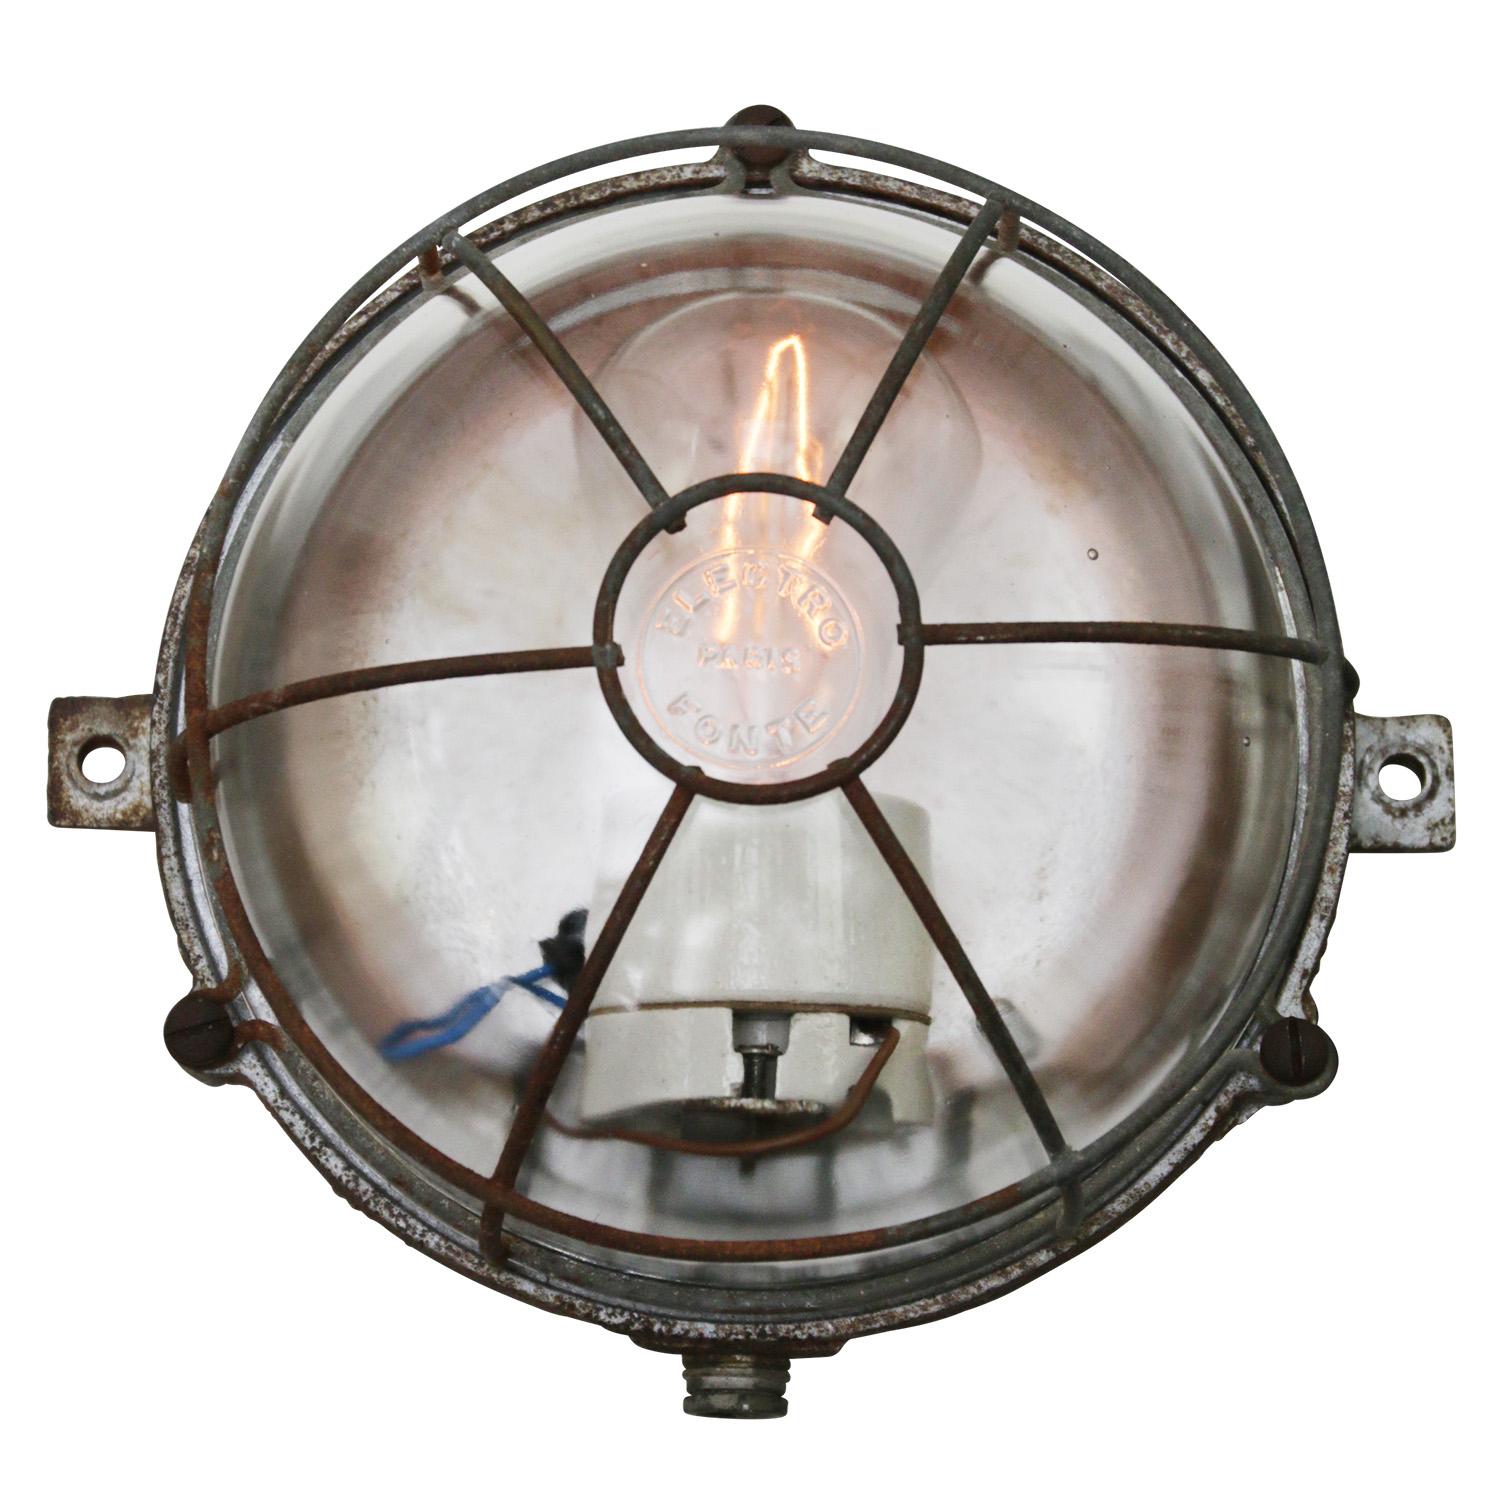 French Industrial wall / ceiling lamp by Electro Fonte Paris, France
Grey cast iron back with clear glass.

Weight: 2.10 kg / 4.6 lb

Priced per individual item. All lamps have been made suitable by international standards for incandescent